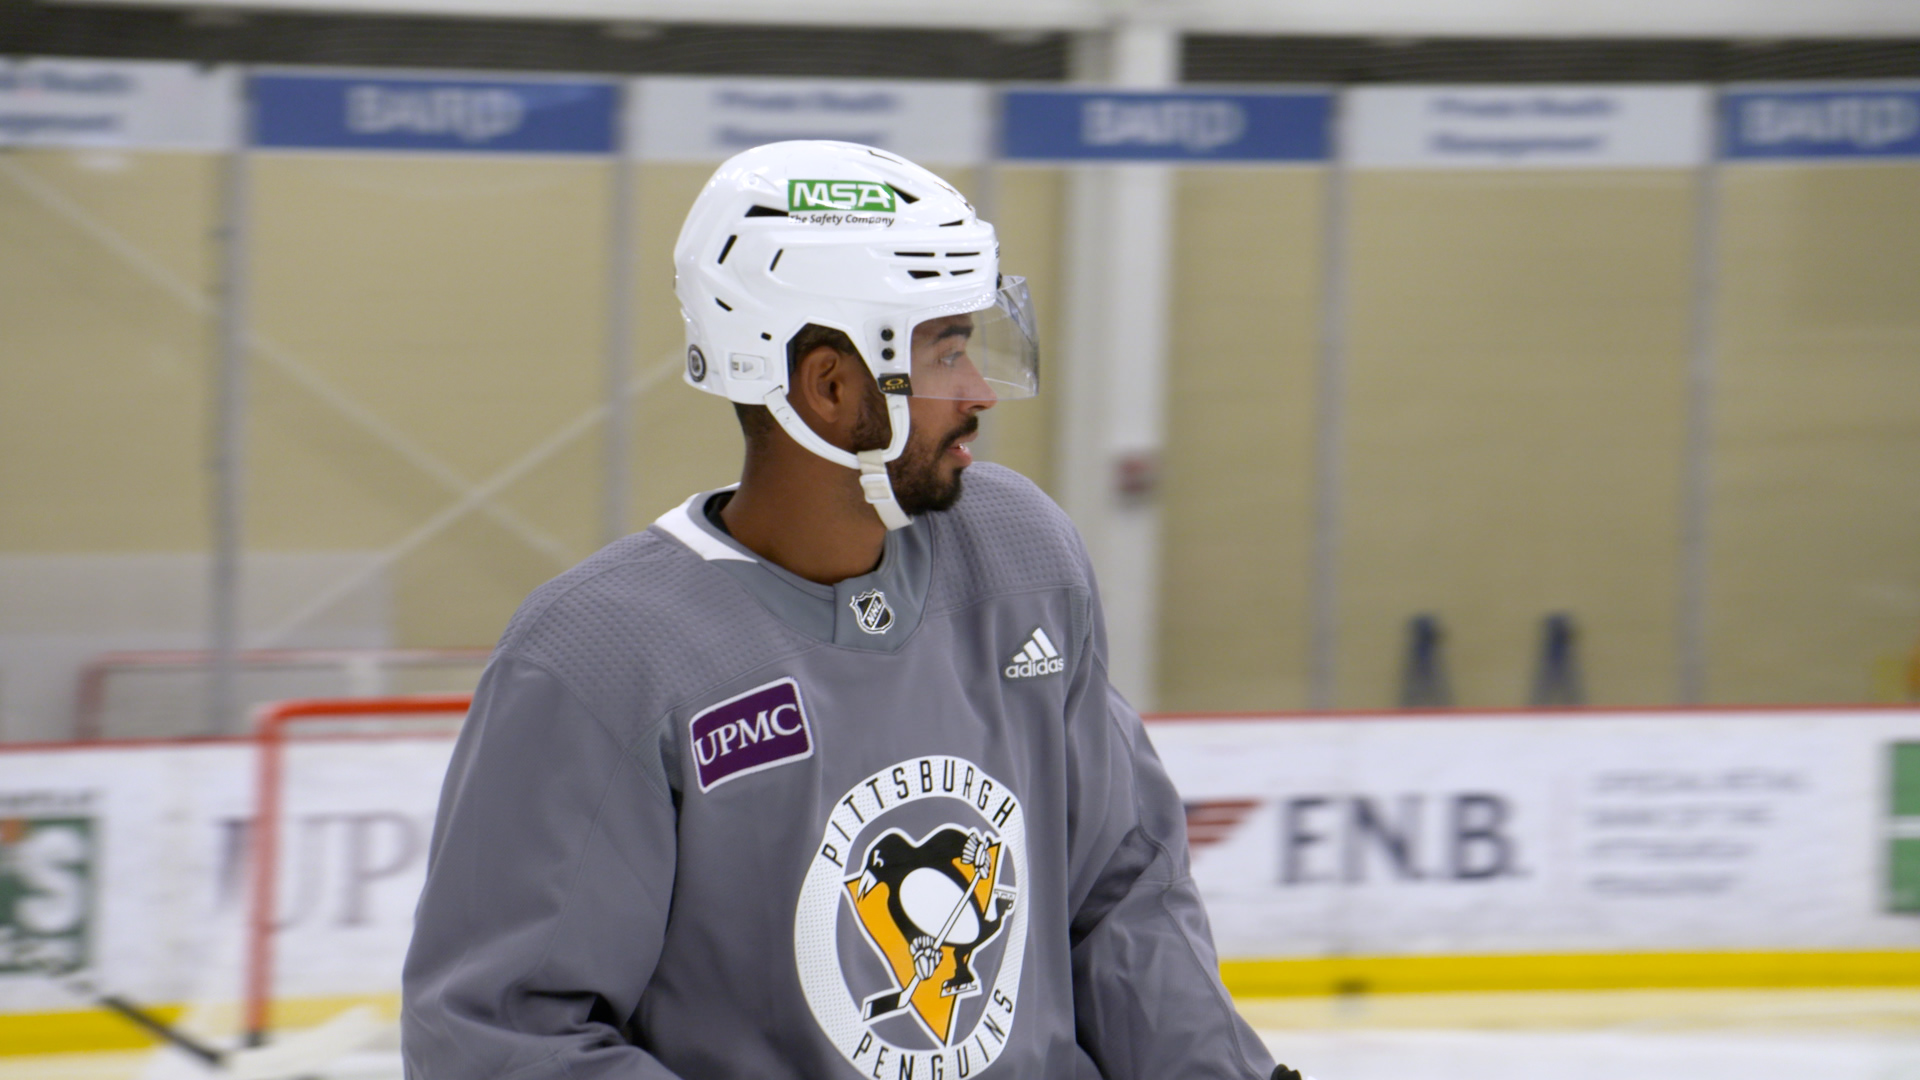 A member of the Pittsburgh Penguins wearing one of the away game helmets during an open skate.